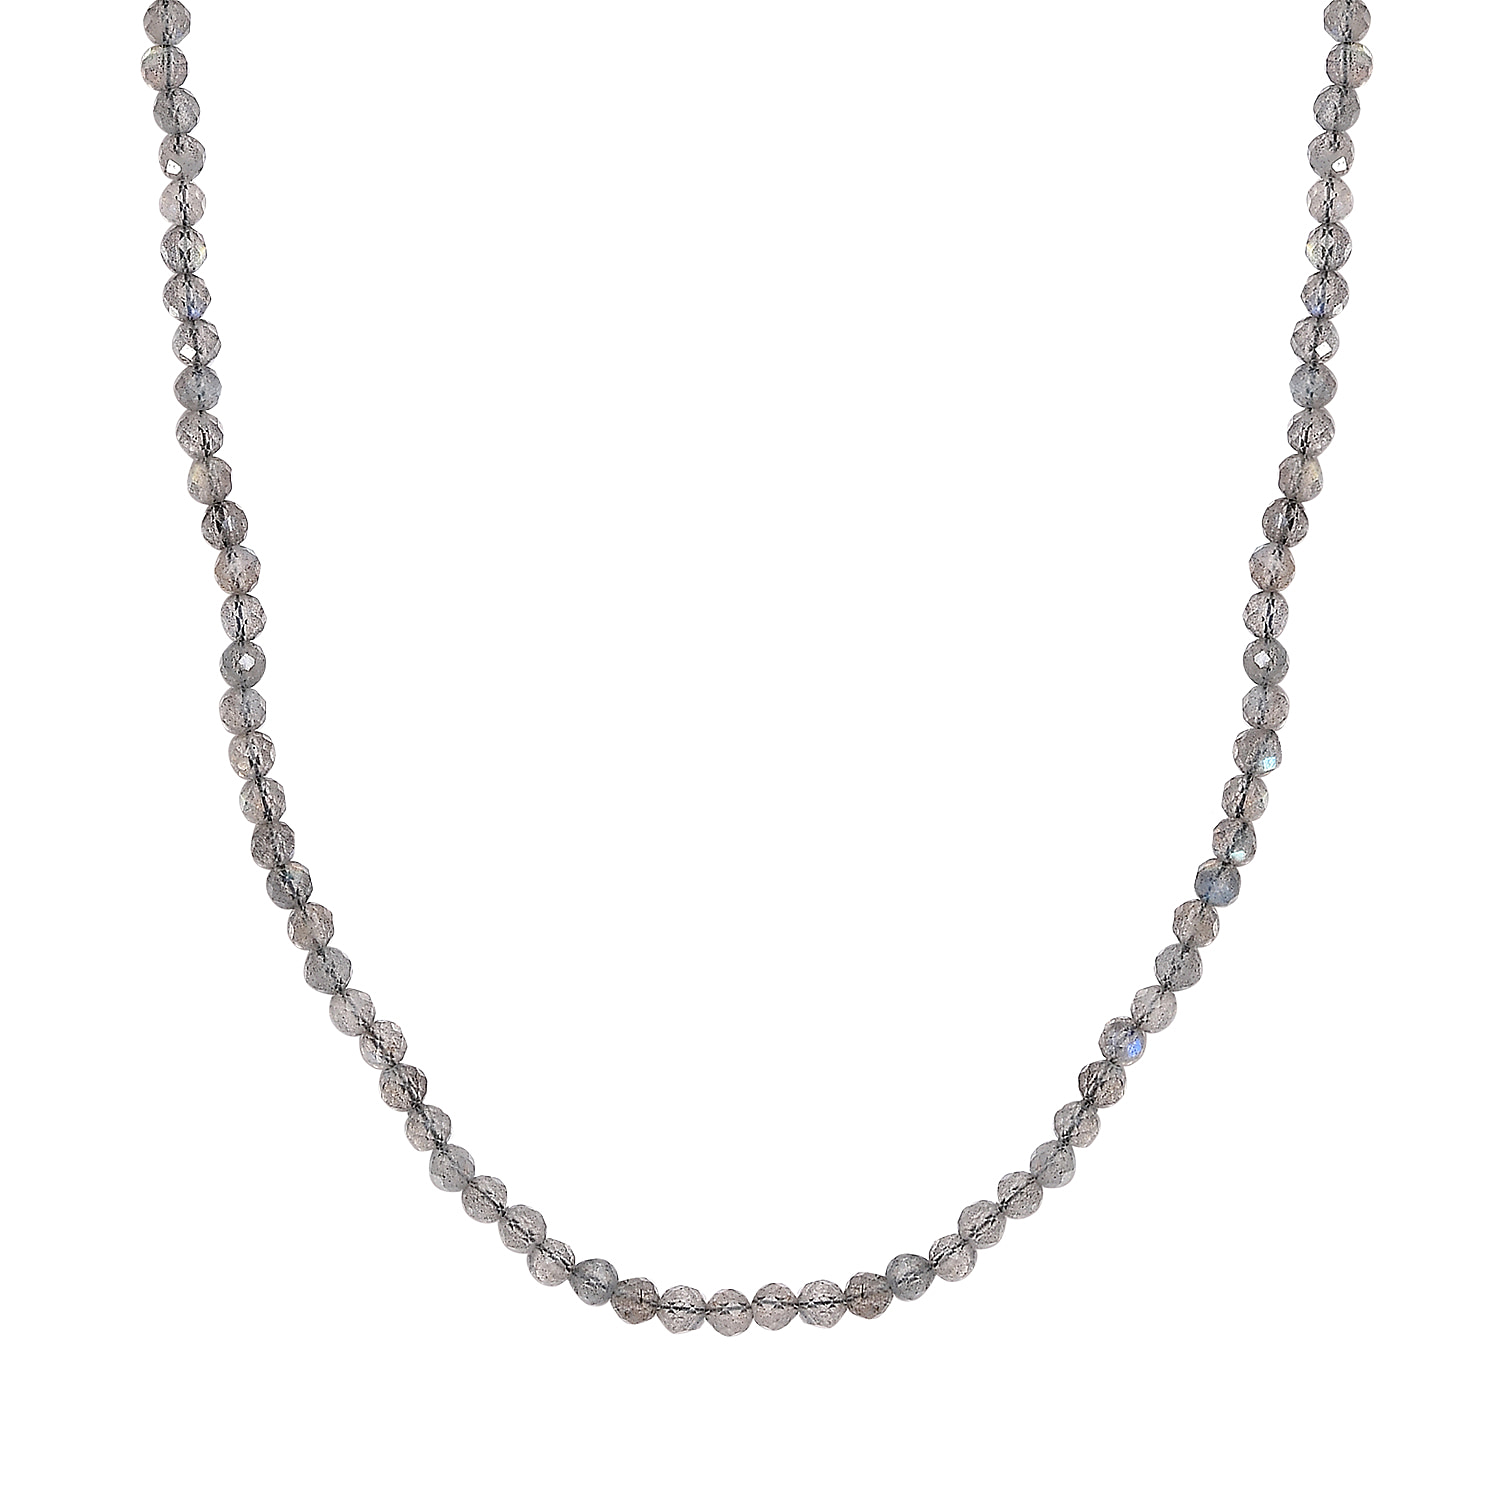 One Time Deal - Labradorite Beads Necklace (Size - 24) in 18K Yellow Gold Vermeil Plated Sterling Silver 61.35 Ct.